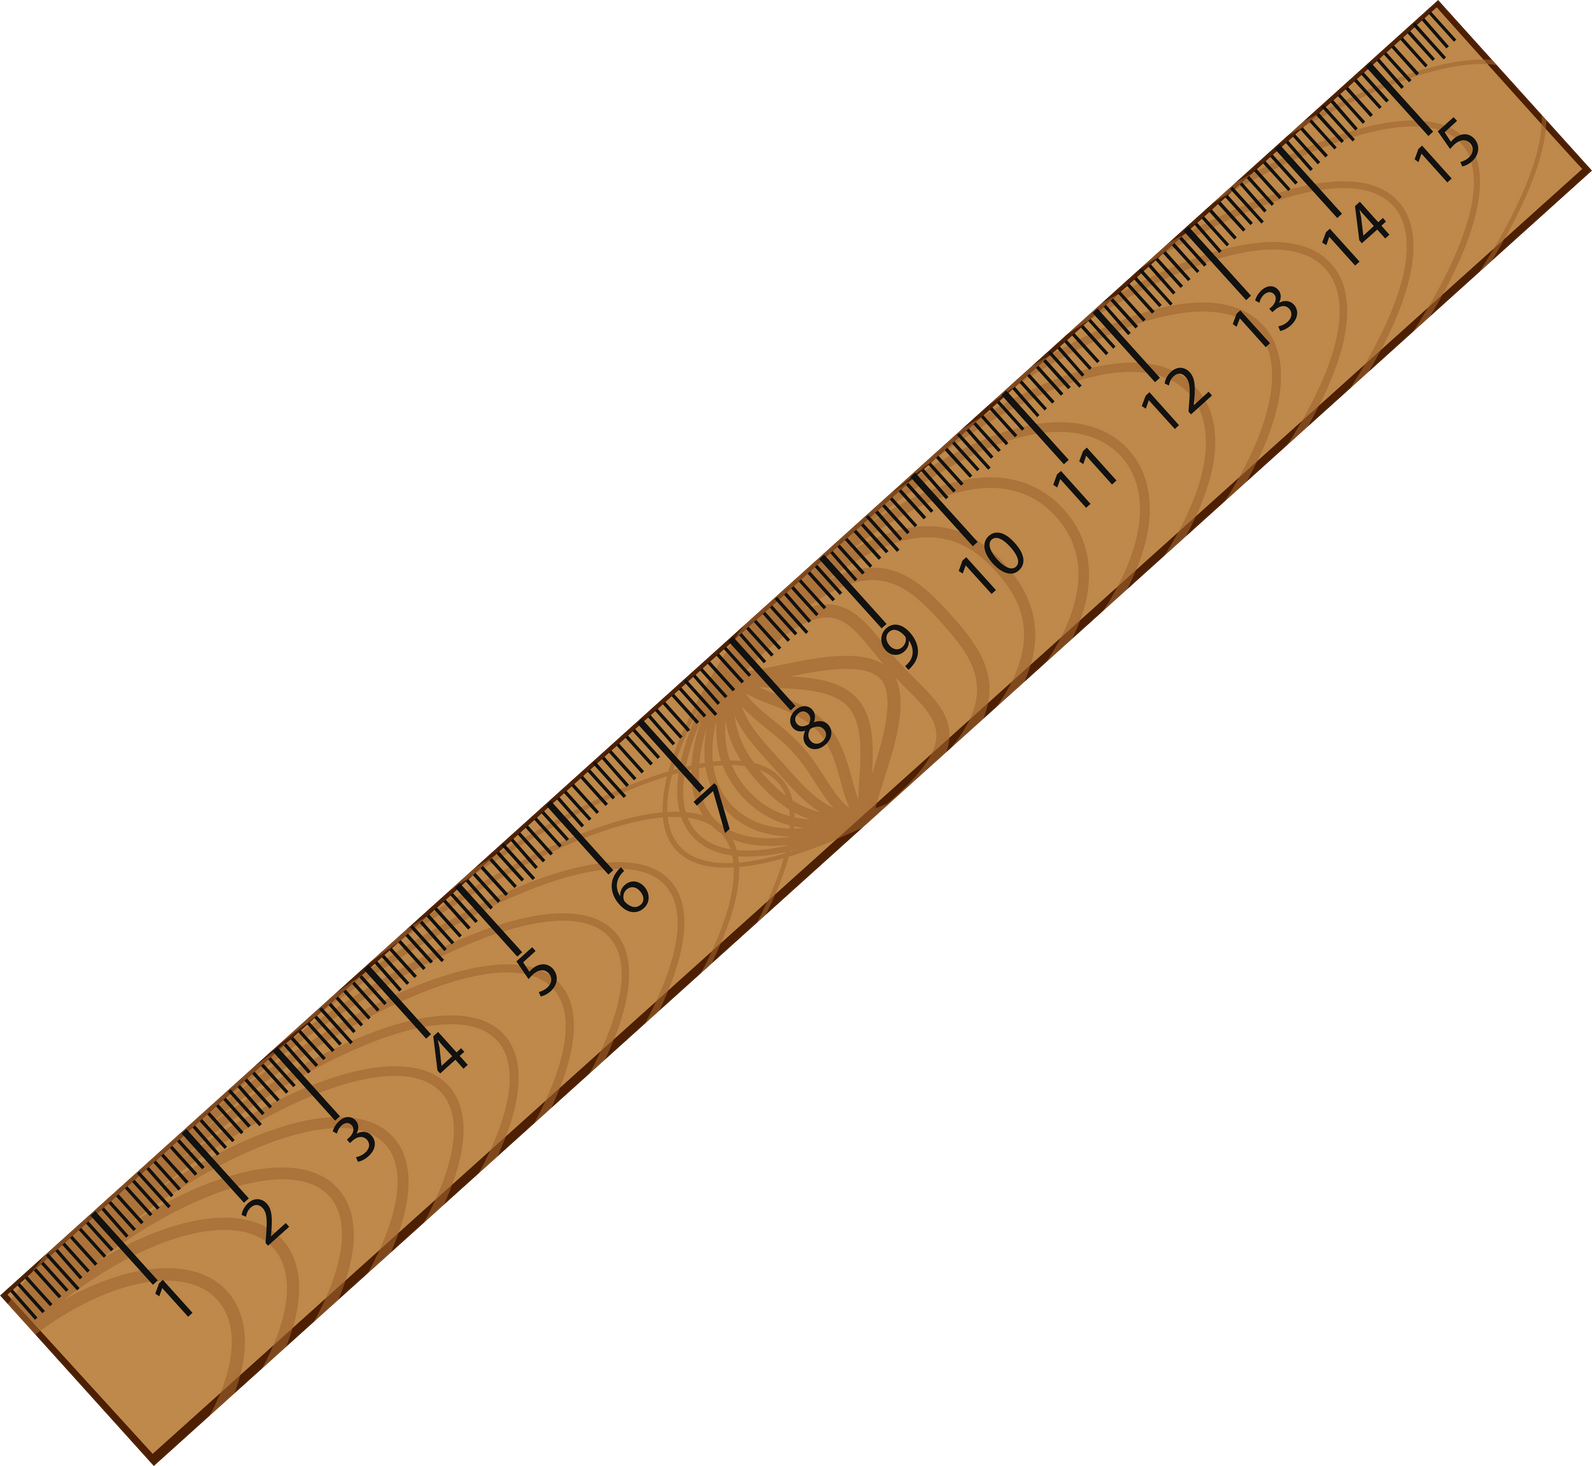 Ruler in centimeters, wooden ruler on a white background